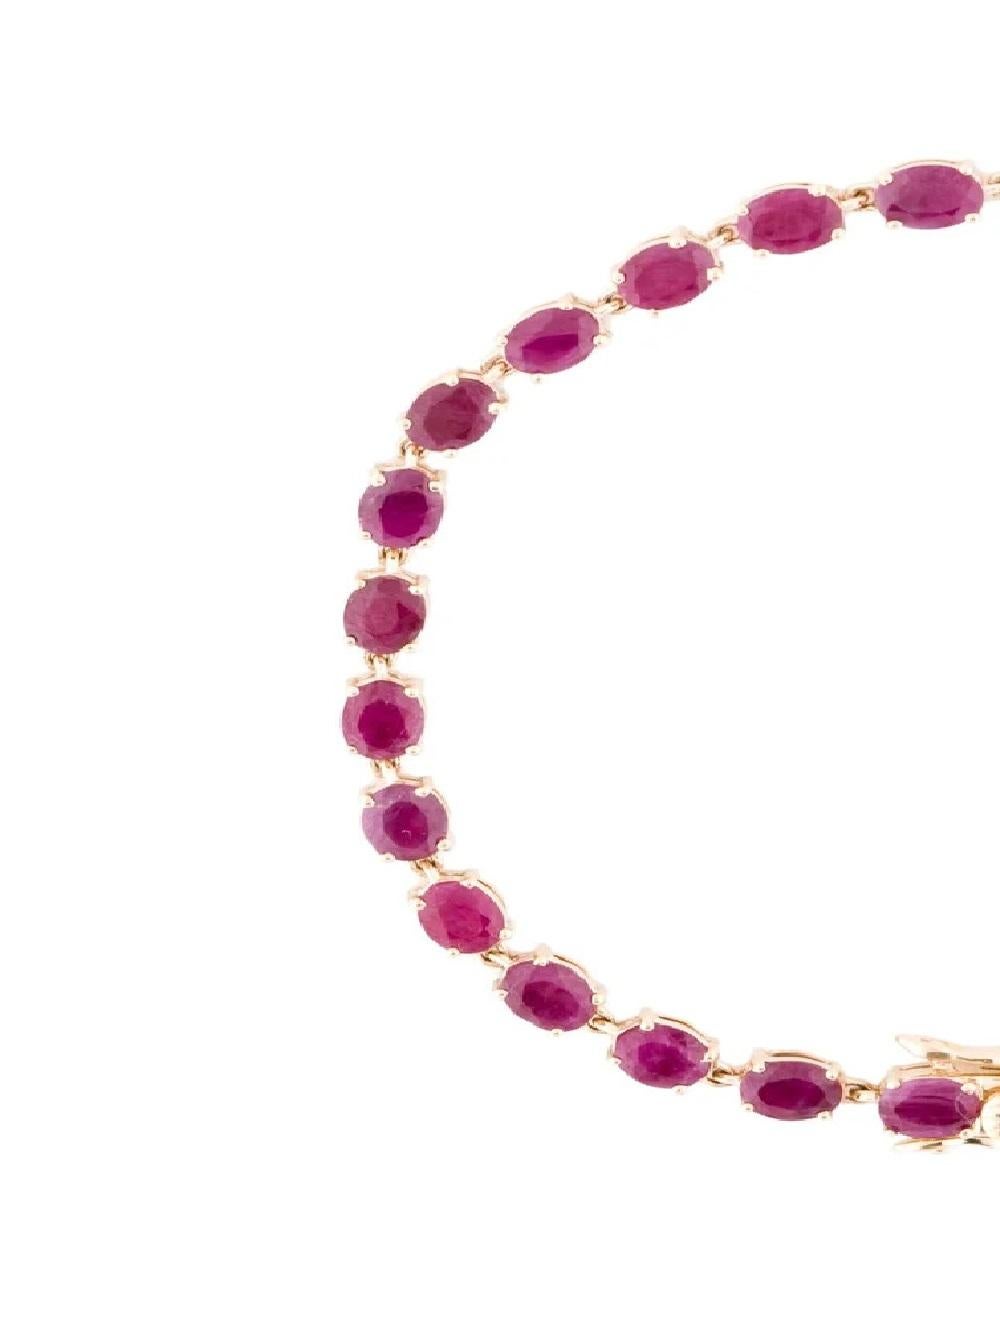 14K Ruby Tennis Bracelet, 10.36ctw - Classic Design, Rich Red Gemstones In New Condition For Sale In Holtsville, NY